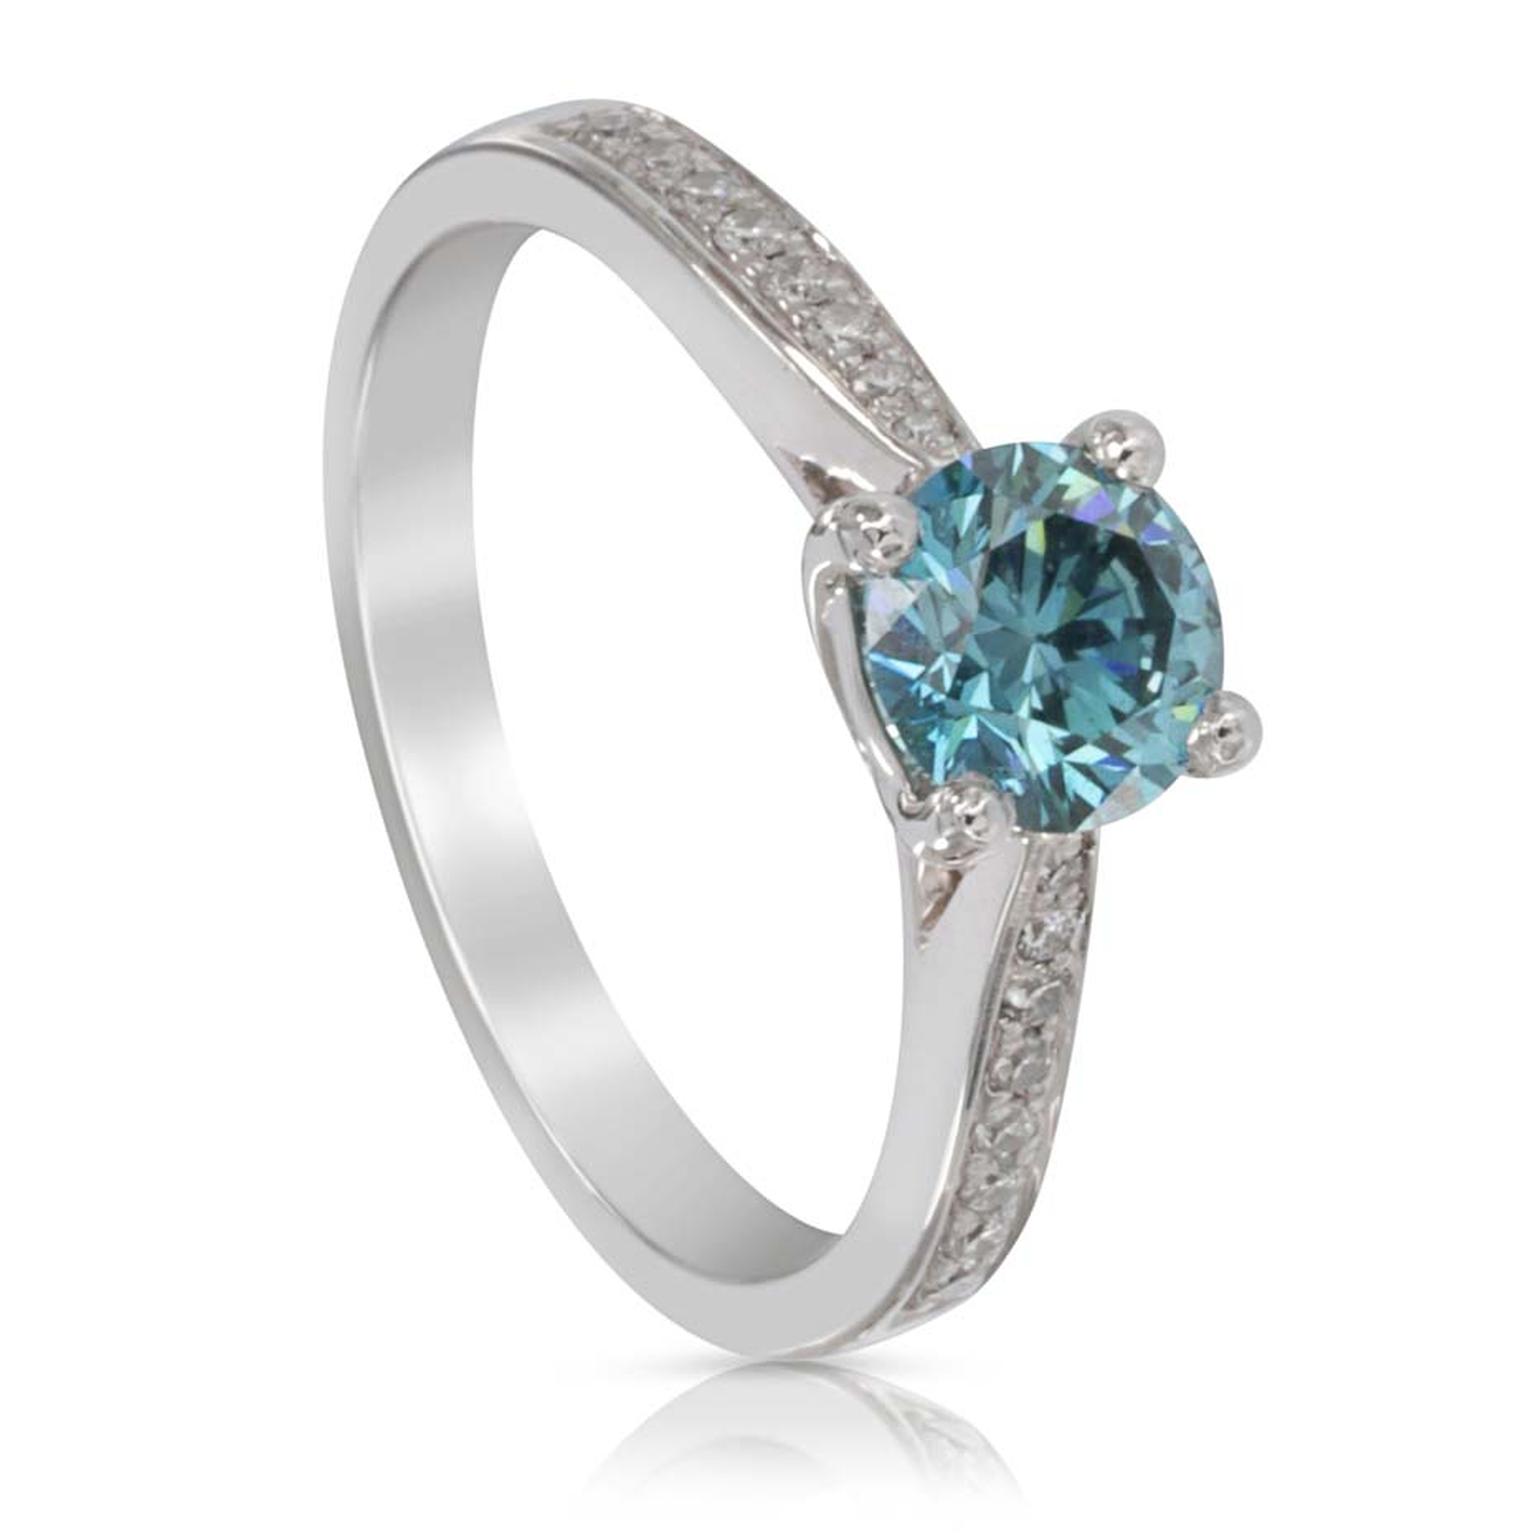 Blue and white diamond ring from Holts London featuring a round brilliant-cut treated blue diamond with diamond shoulders.